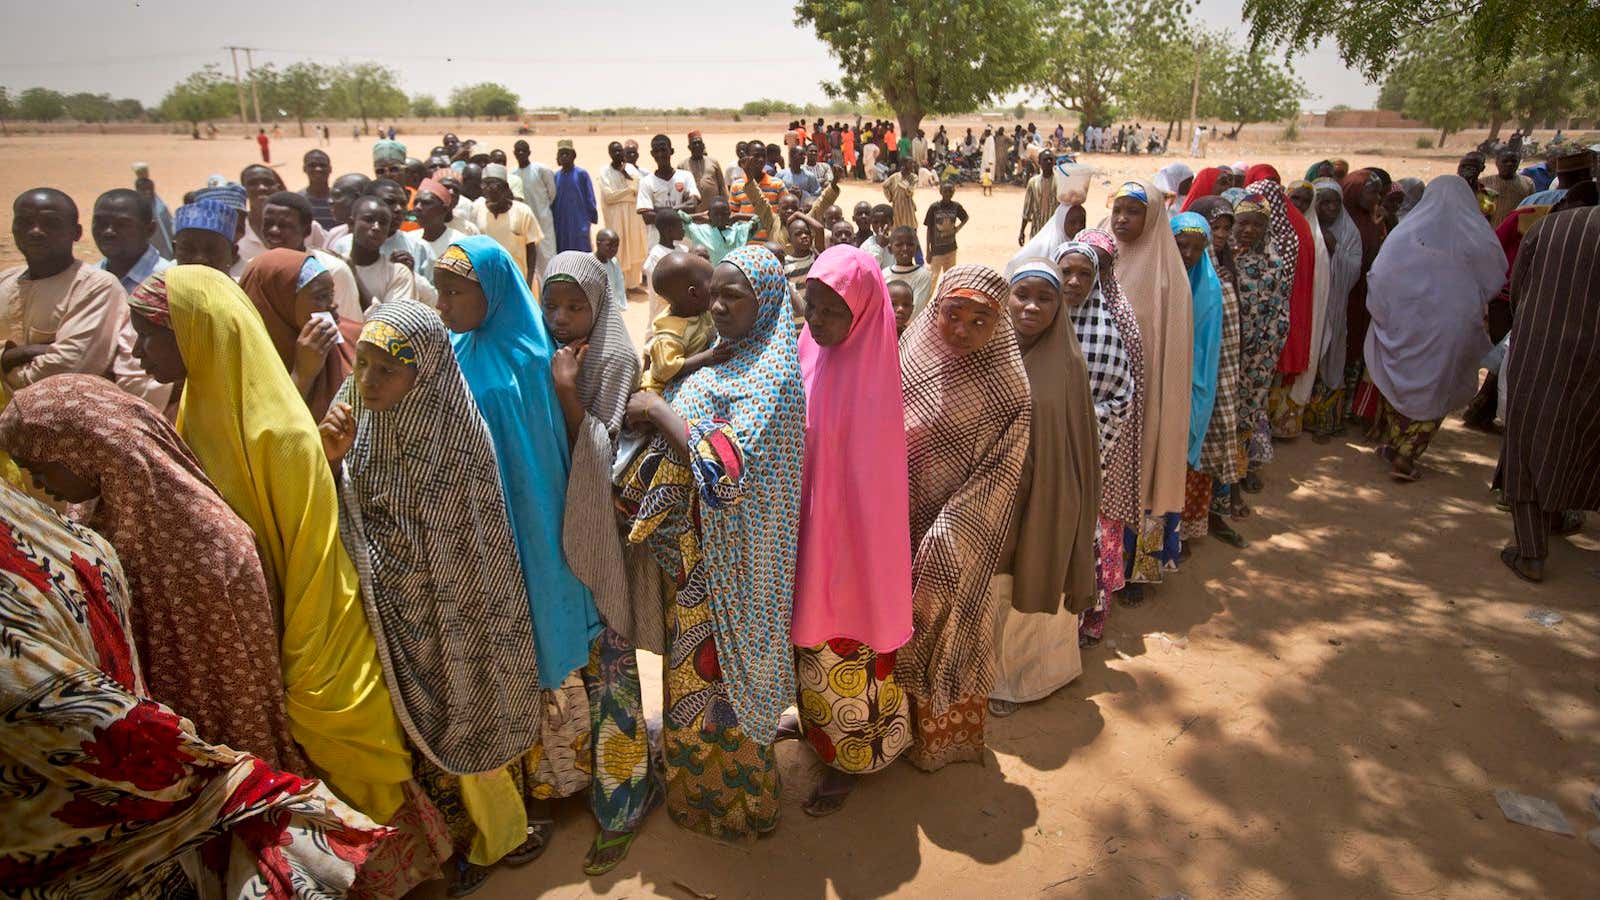 Women voters stood in line in the hot sun.